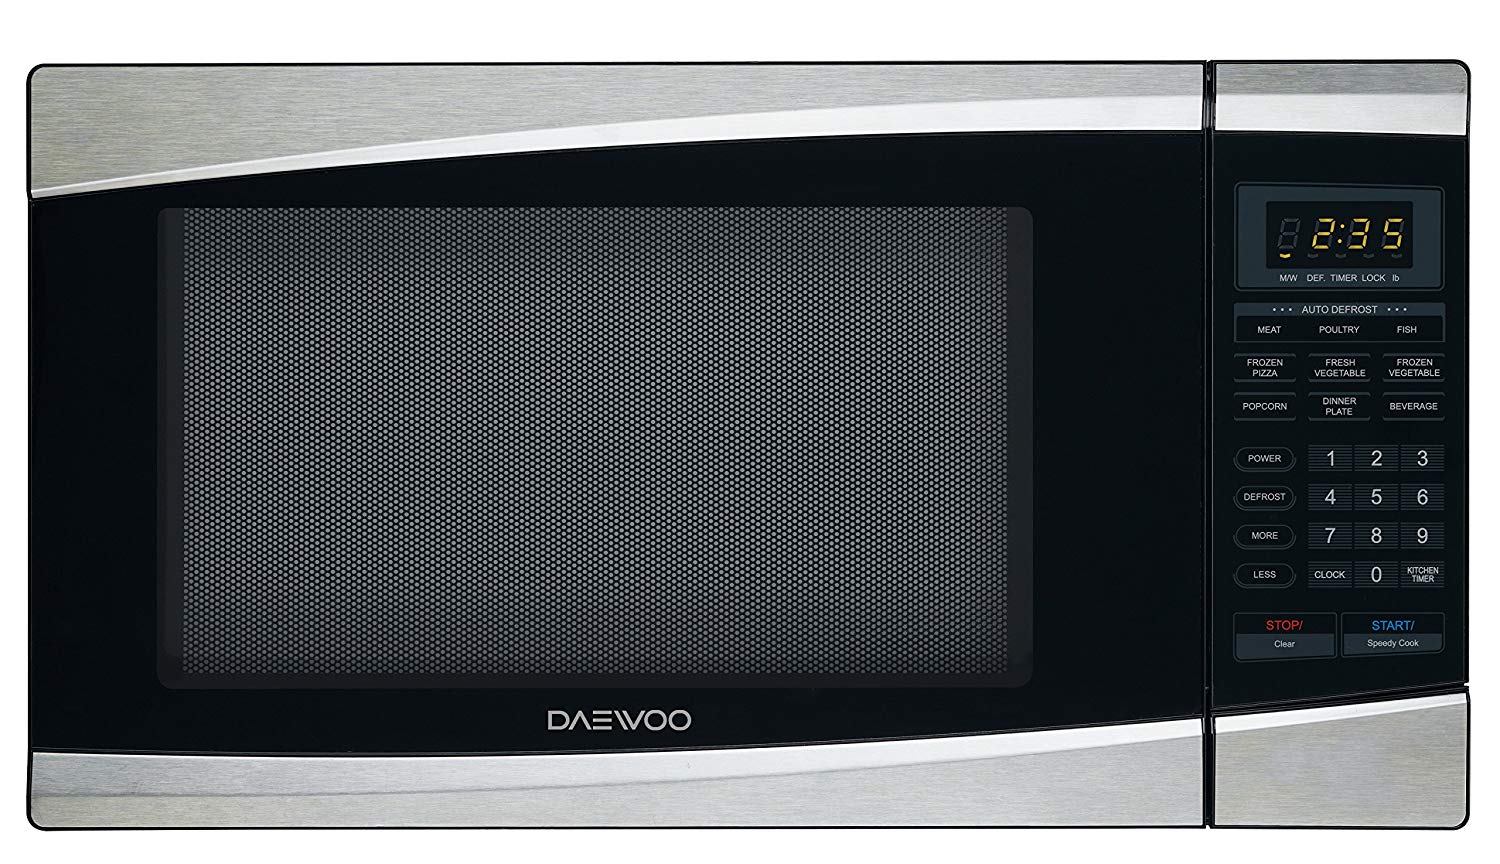 Daewoo 1.3 cu ft Microwave Oven, Stainless Steel